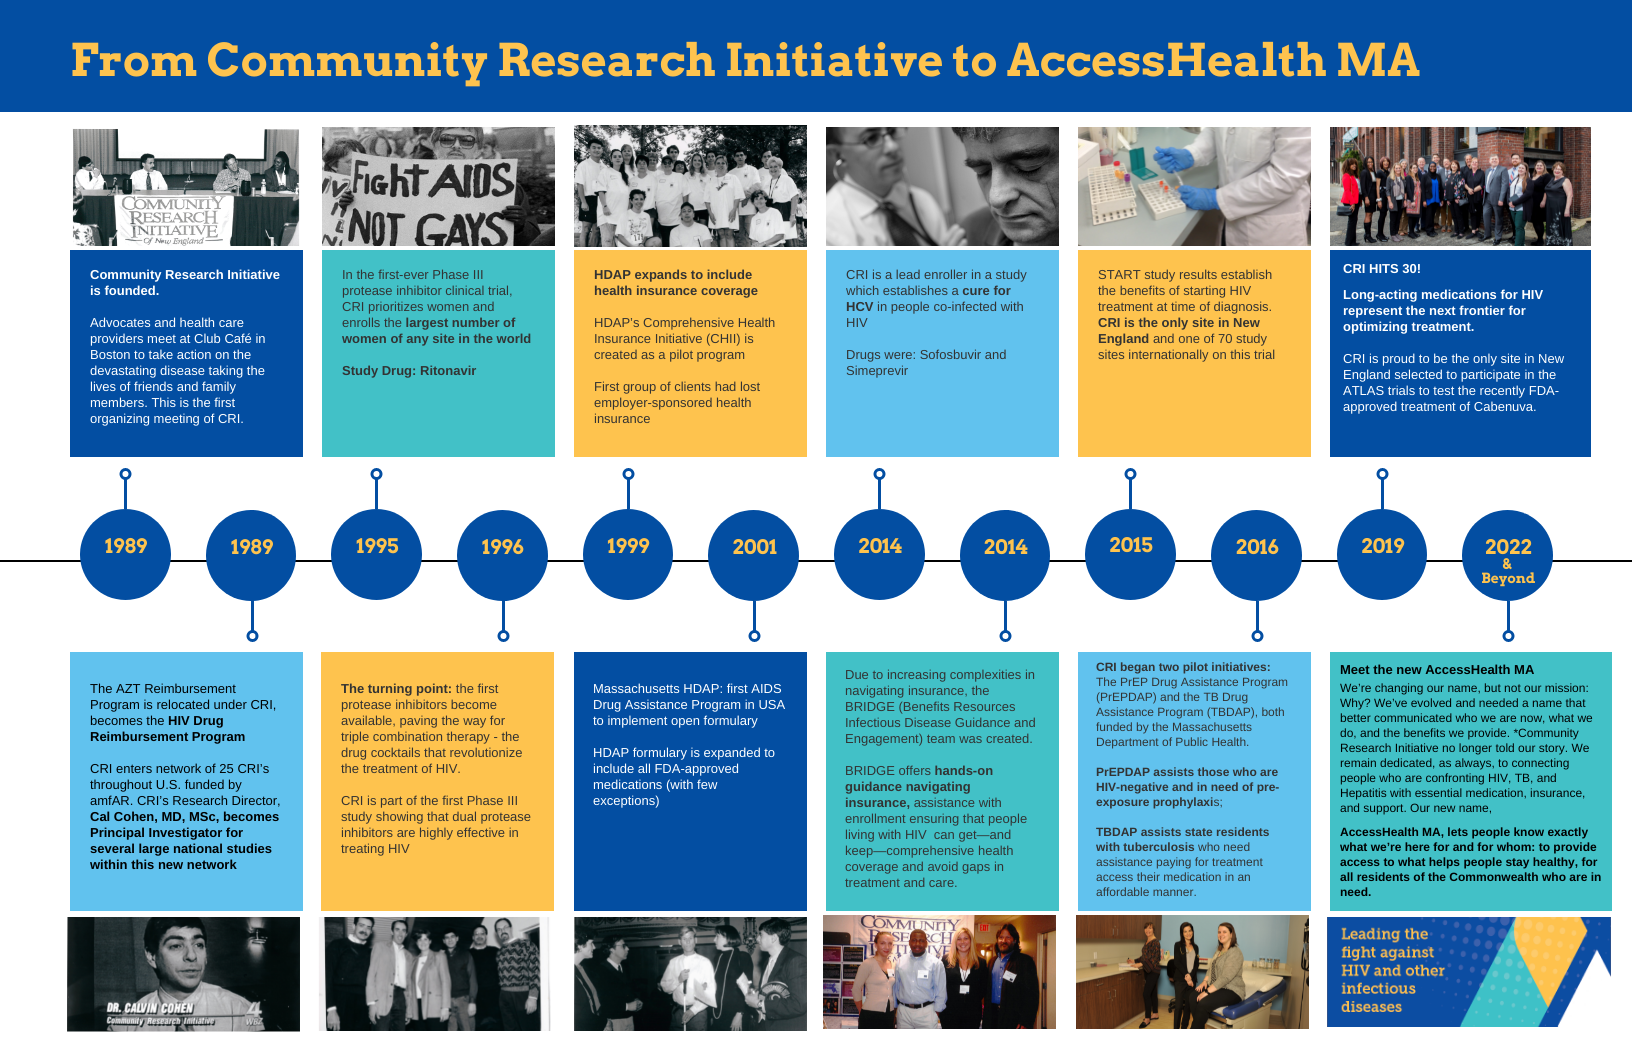 Timeline of AccessHealth MA's/ Community Research Initiative's CRI History from 1989 to 2022